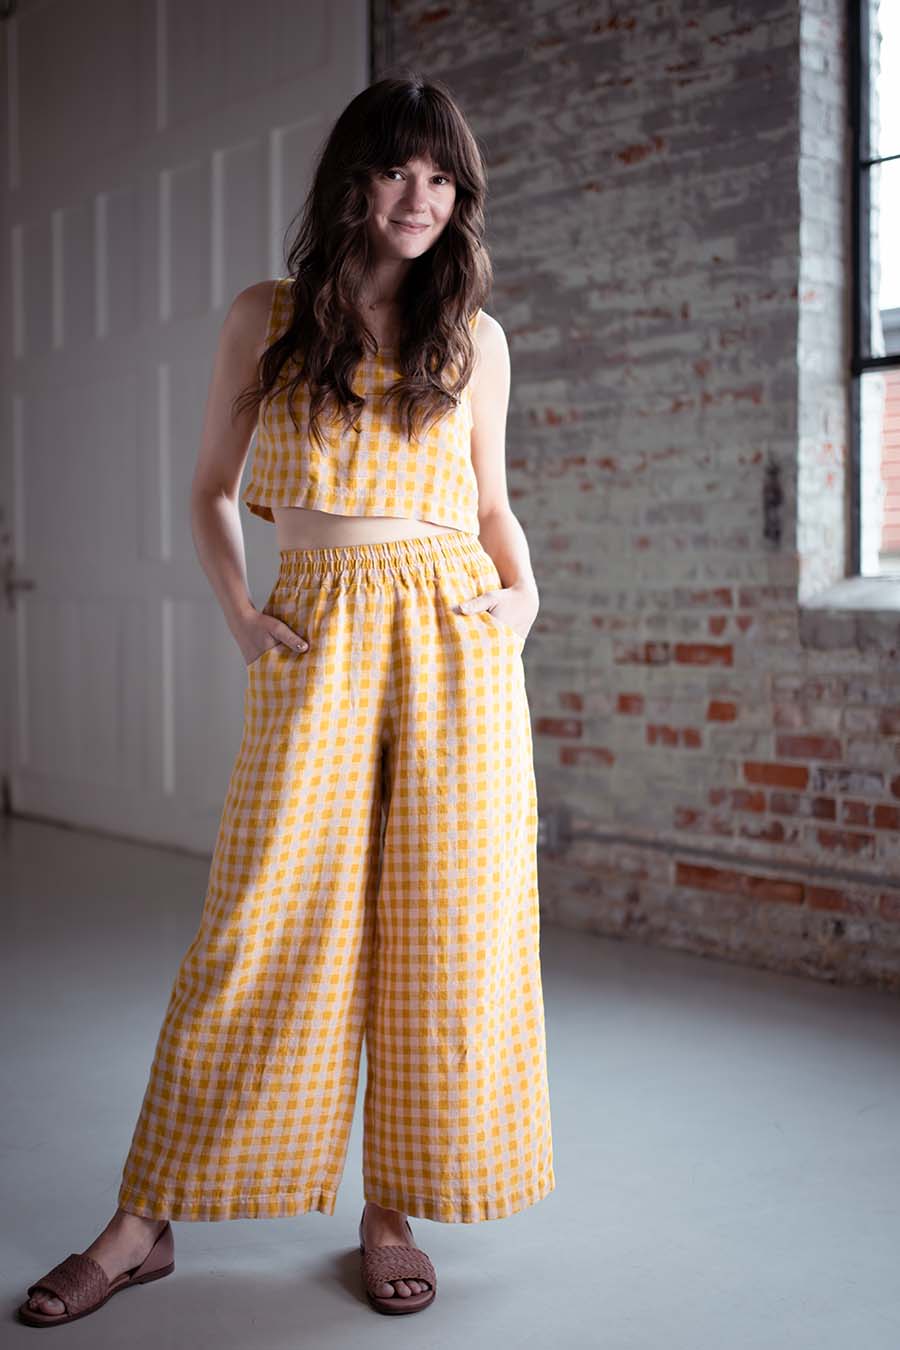 Meredith wears a pink and yellow gingham hinterland crop top and matching chanterelle pants.